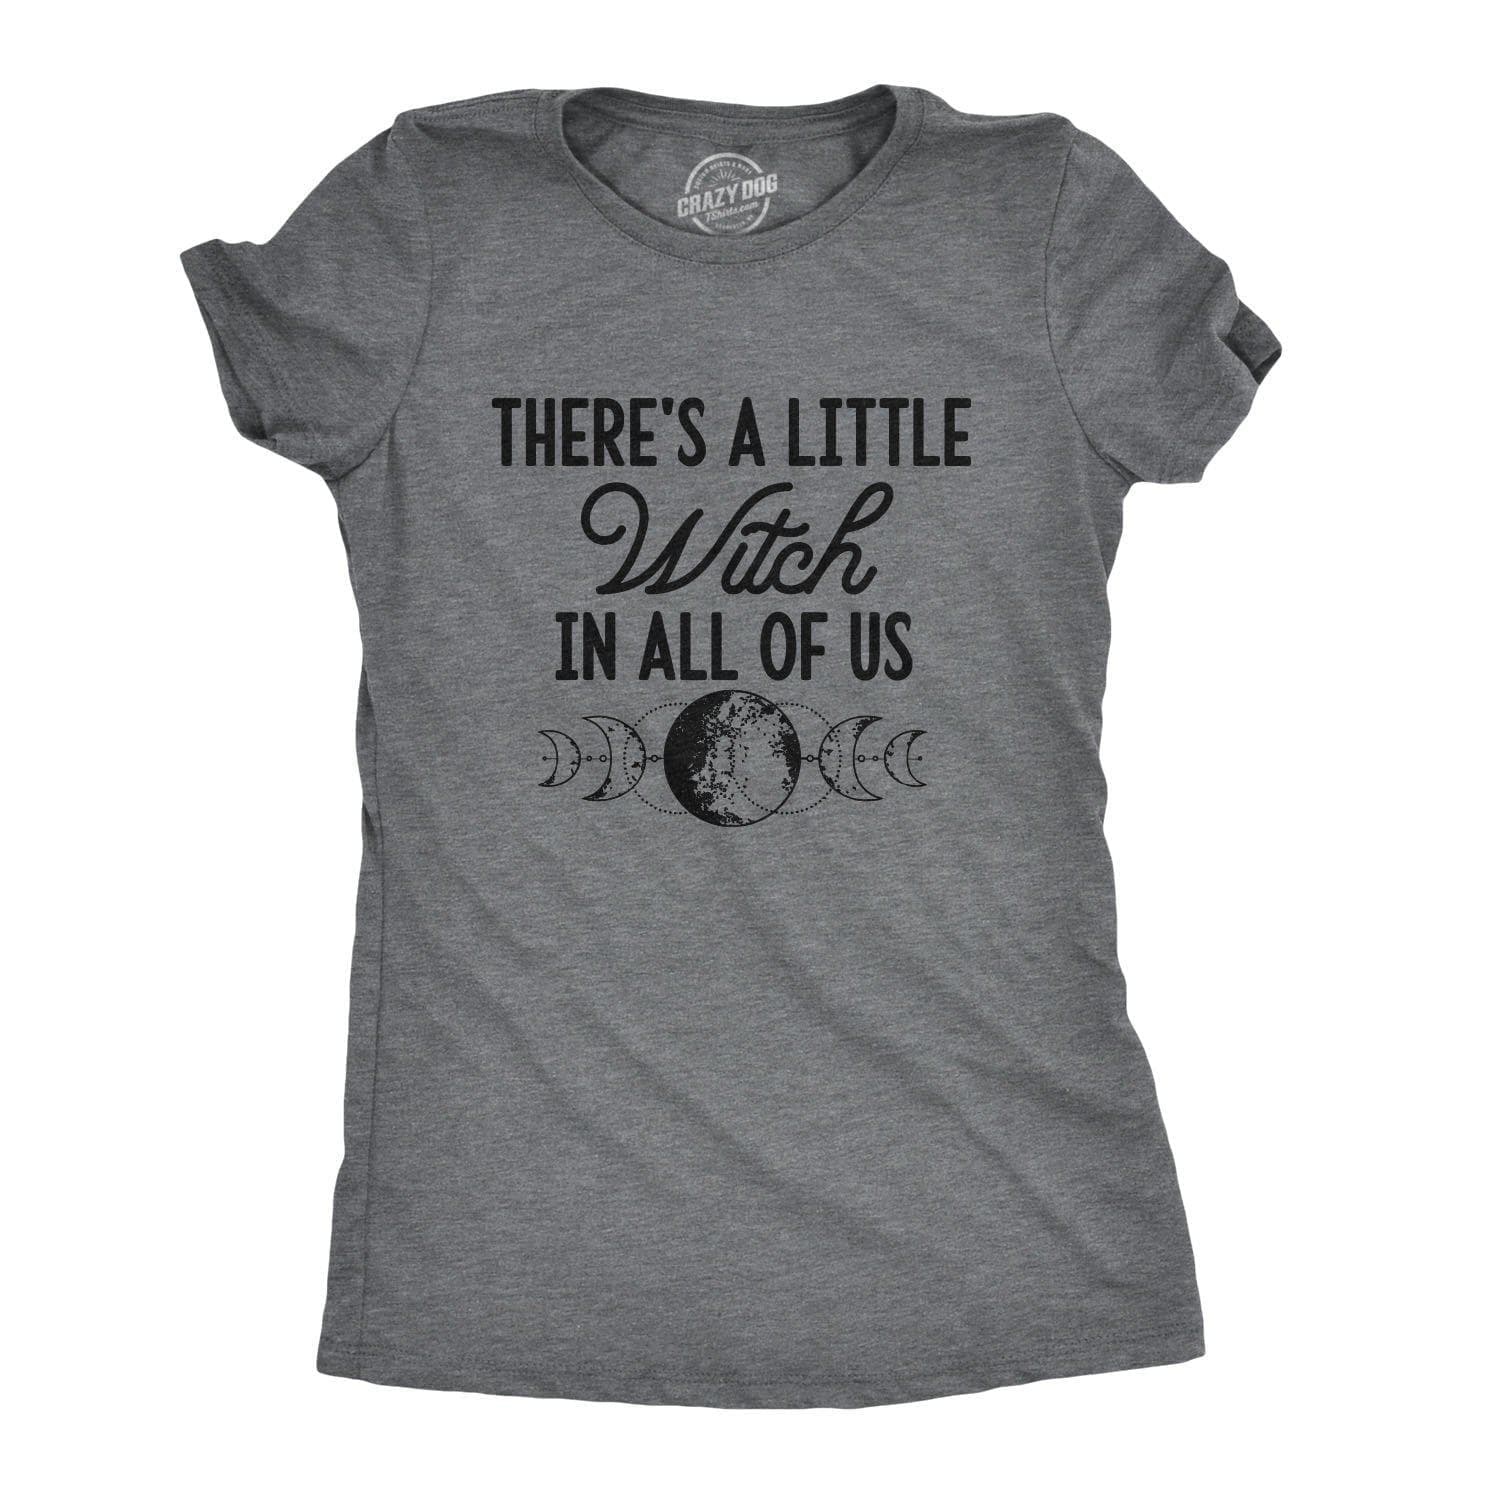 There's A Little Witch In All Of Us Women's Tshirt - Crazy Dog T-Shirts